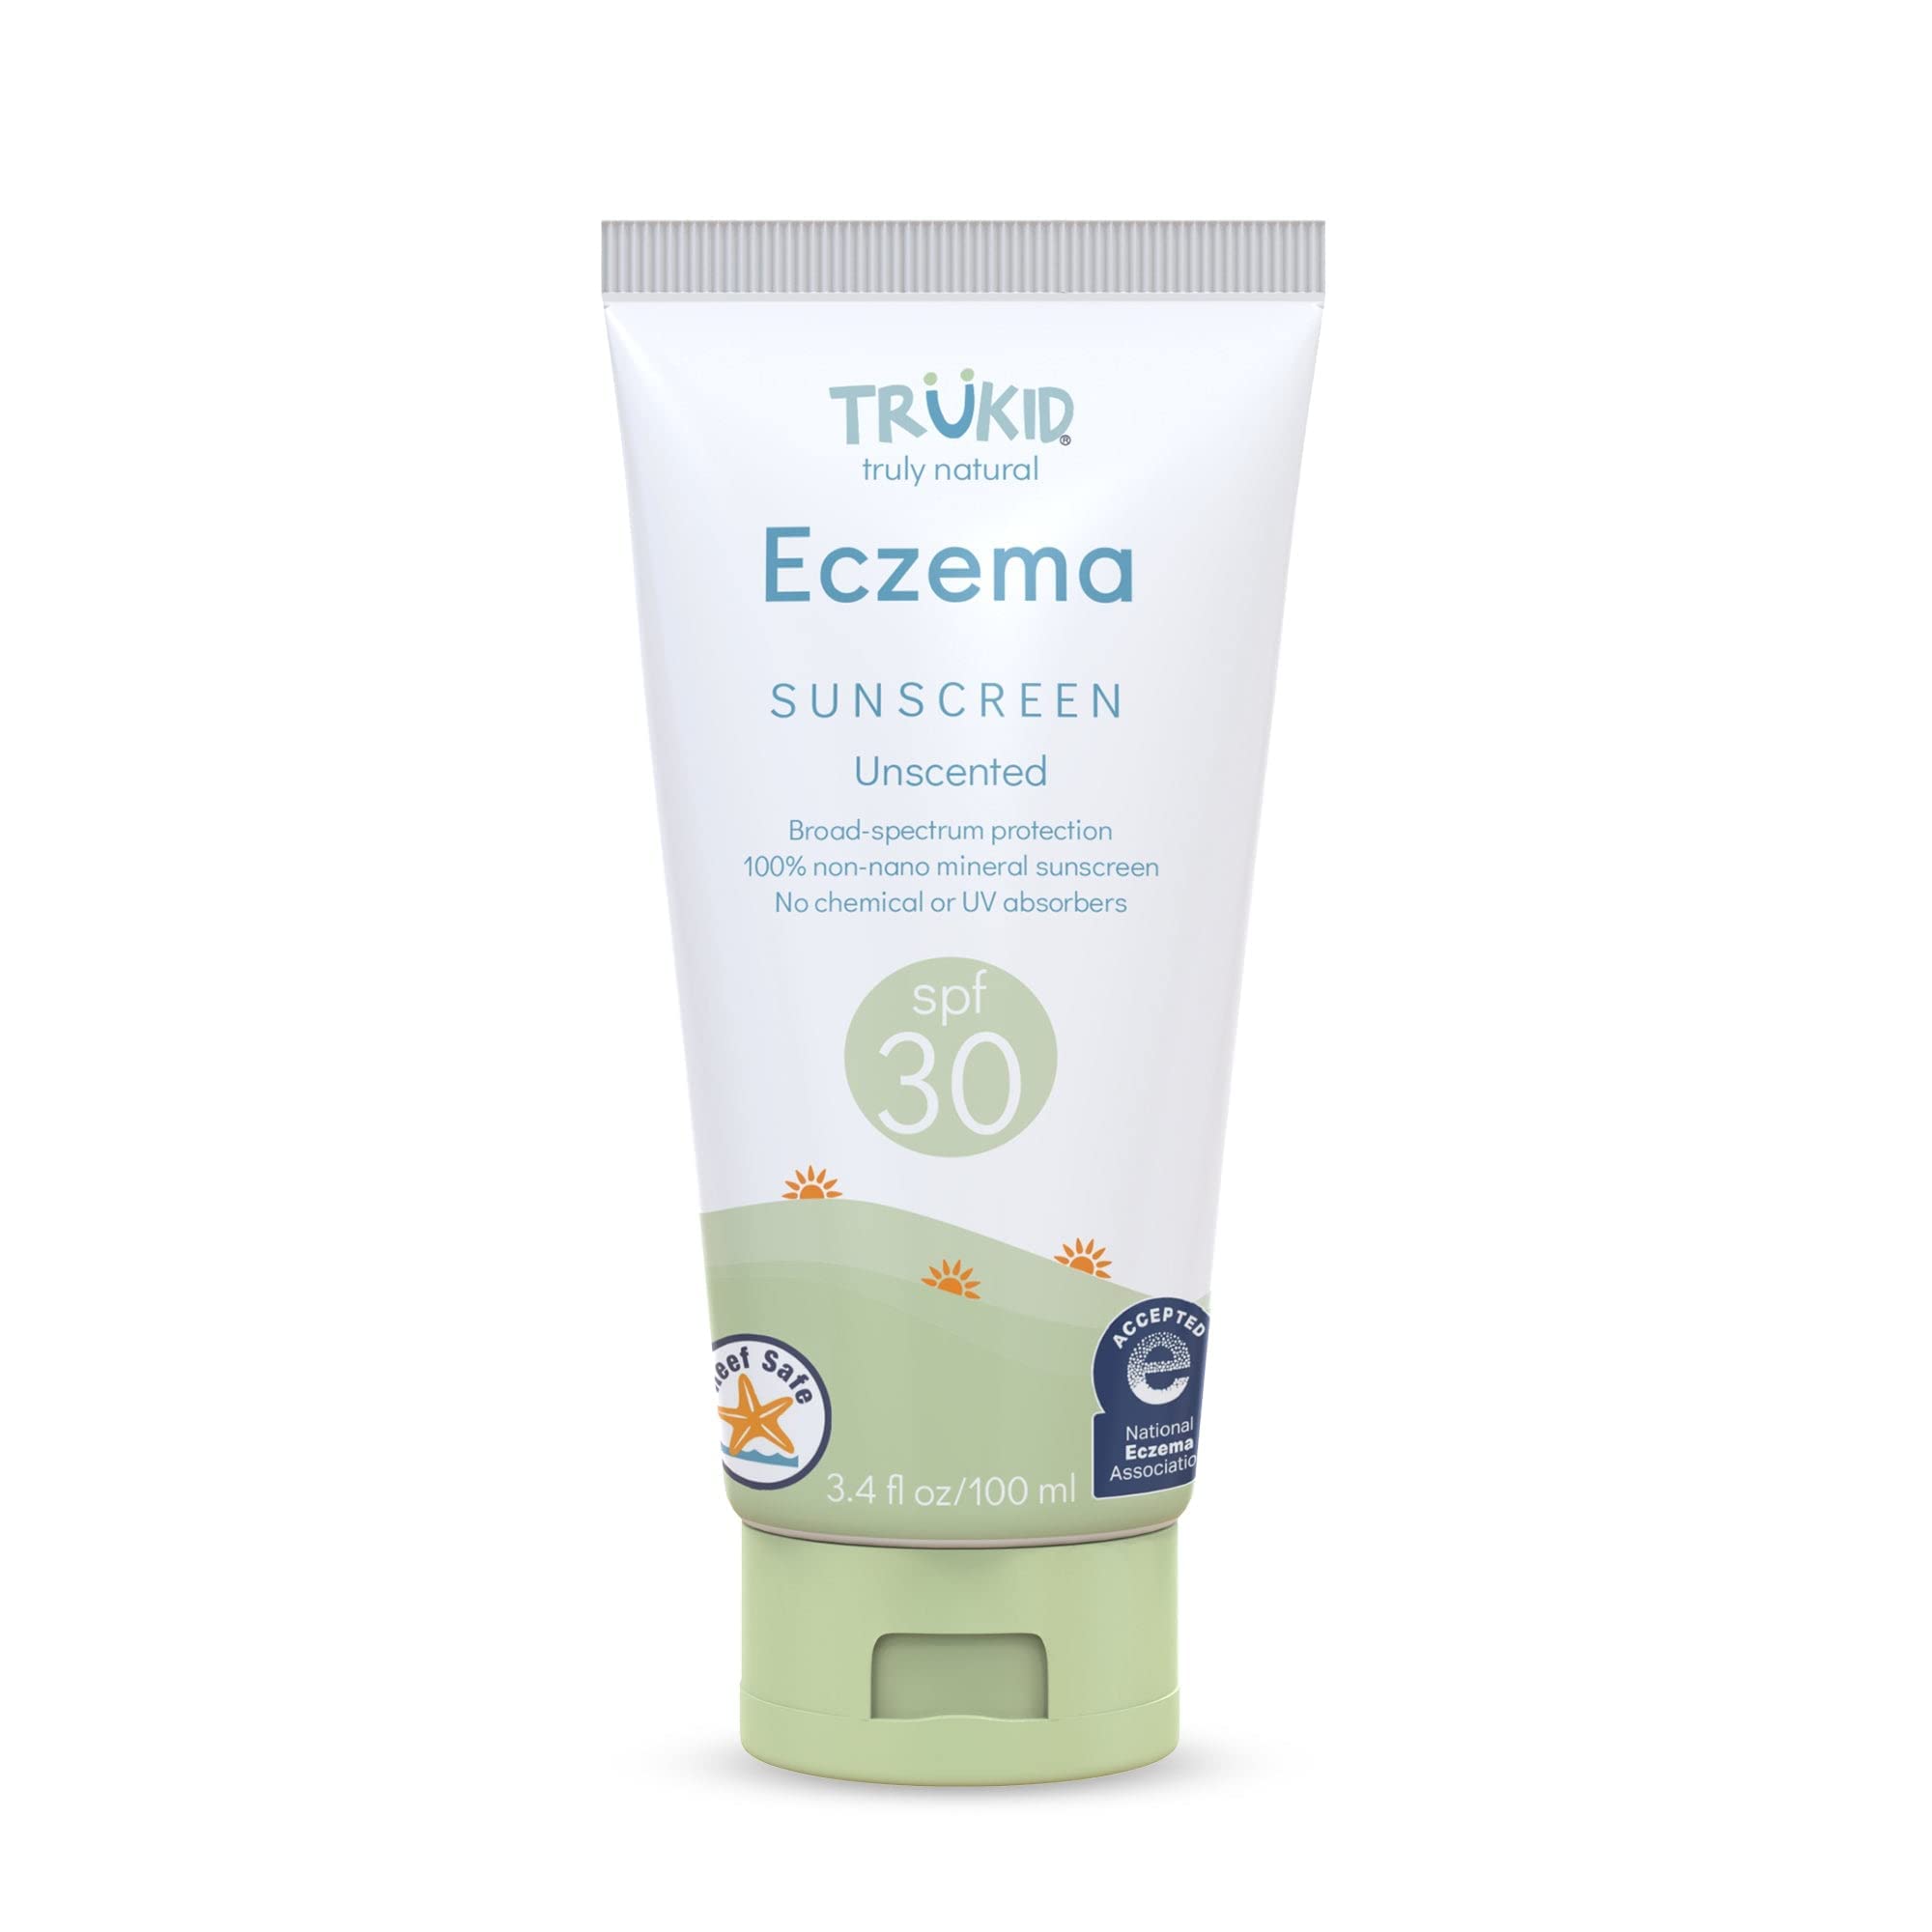 TruKid Eczema SPF 30+ Sunscreen - UVAUVB Protection for Sensitive and Irritated Skin, Unscented, NEA-Approved for Eczema, FSA El